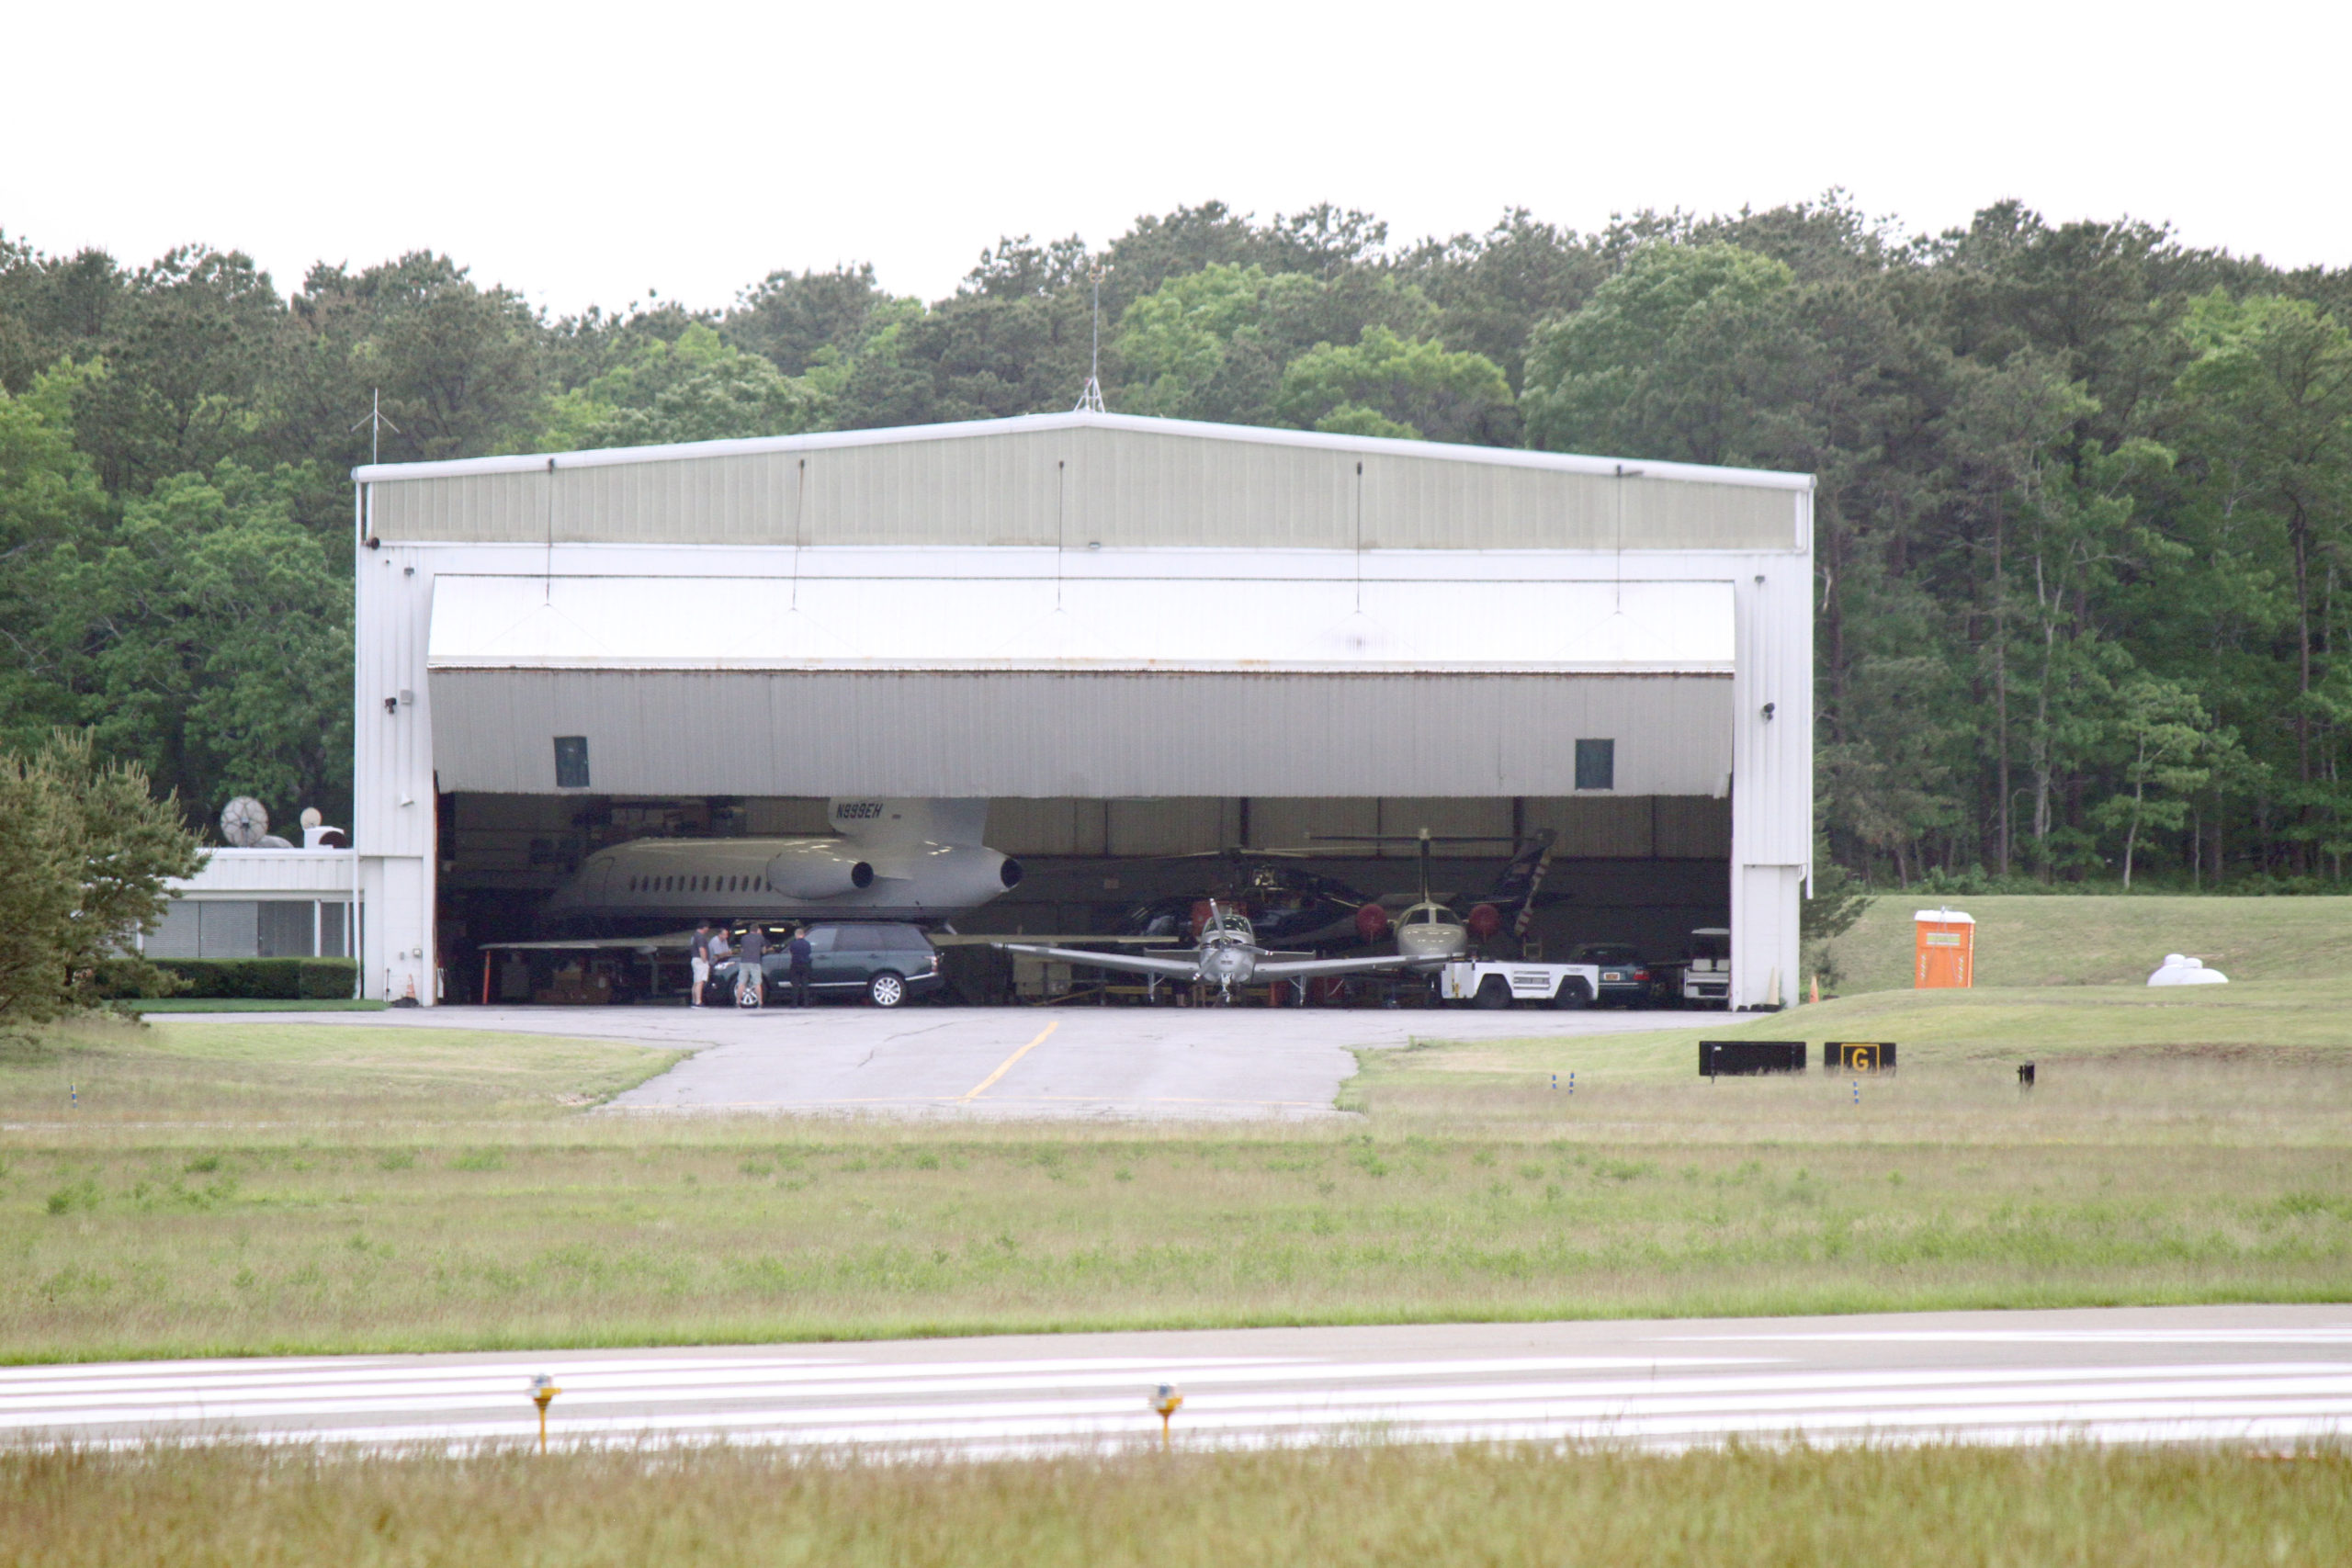 The estate of the late Ben and Bonnie Krupinski, who owned the largest hangar at East Hampton Airport is among the groups that have asked a court to stop the town from closing the airport, even temporarily.